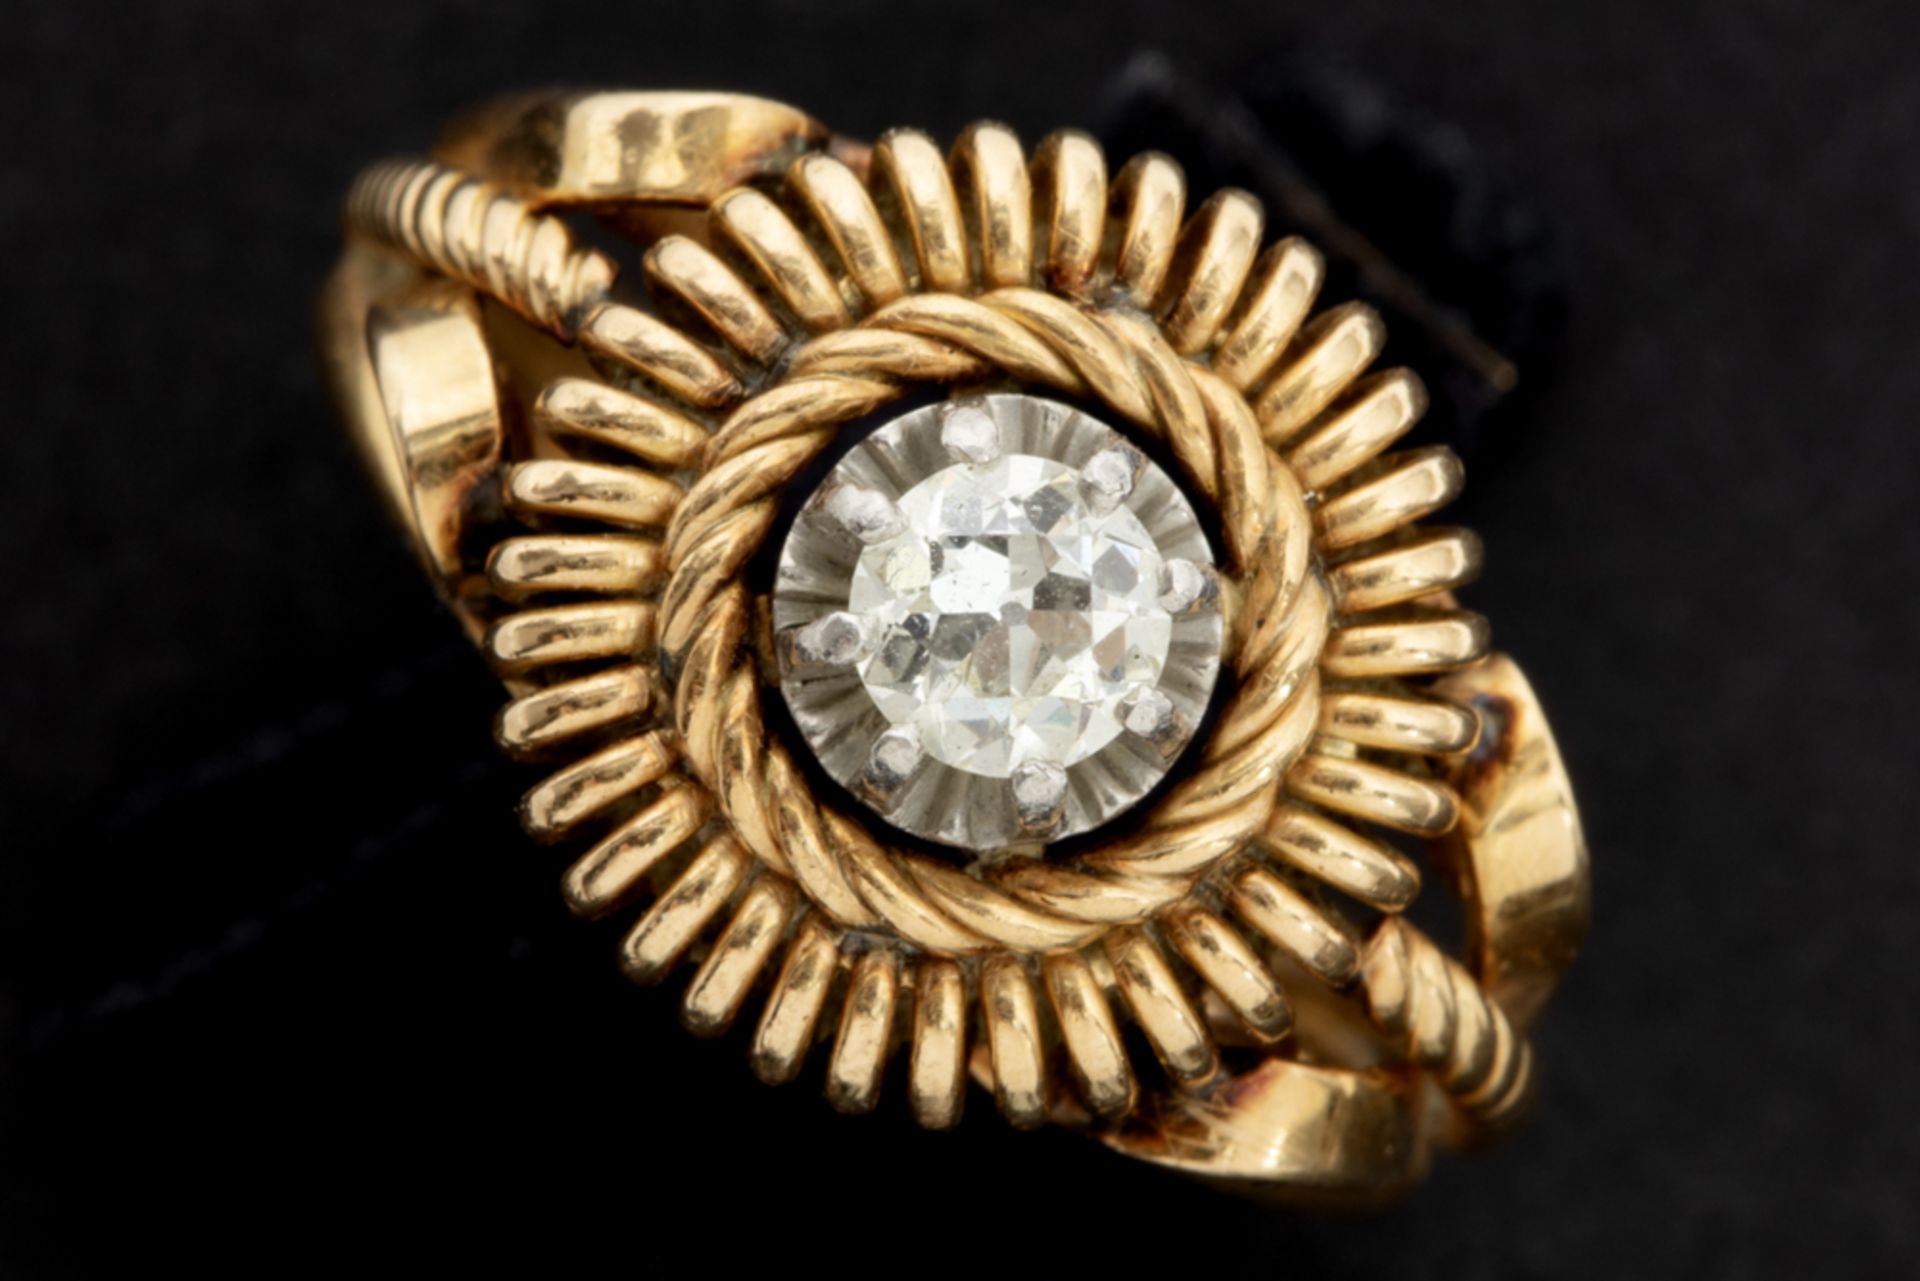 fifties' ring in pink gold (18 carat) with one circa 0,30 carat old brilliant cut diamond ||